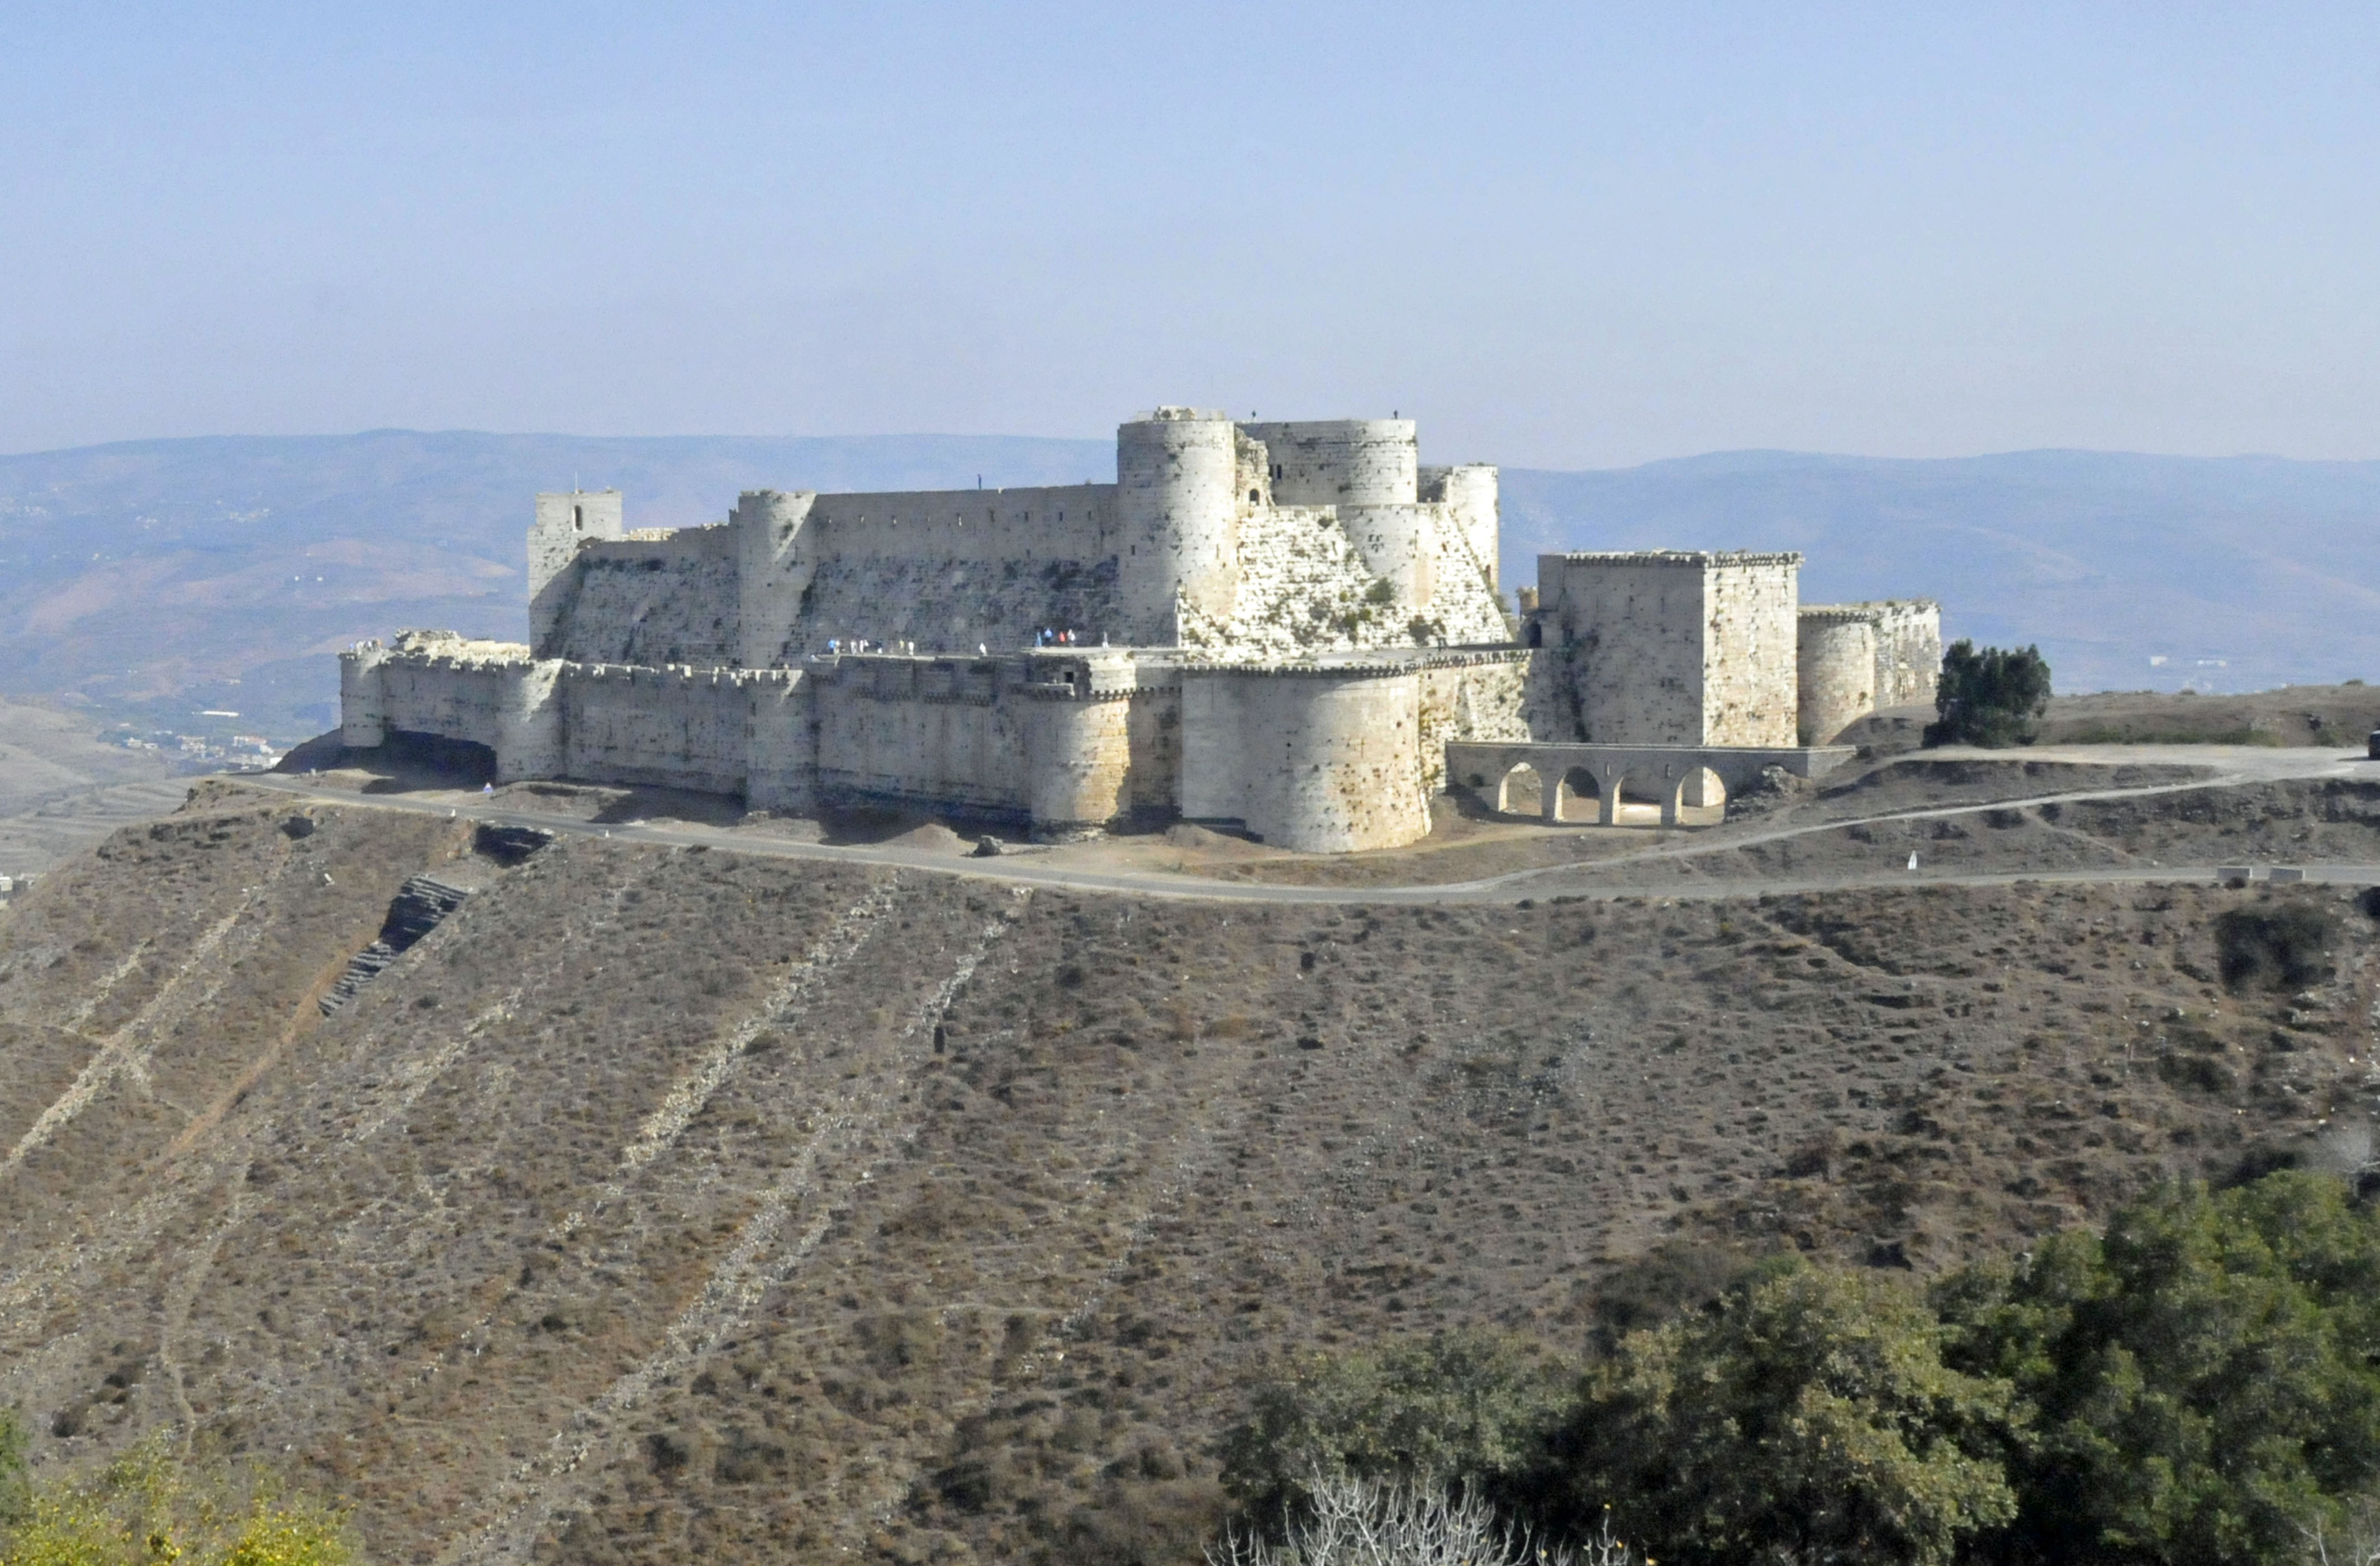 Crac des Chevaliers near Homs, Syria. (Photo by Don Knebel)